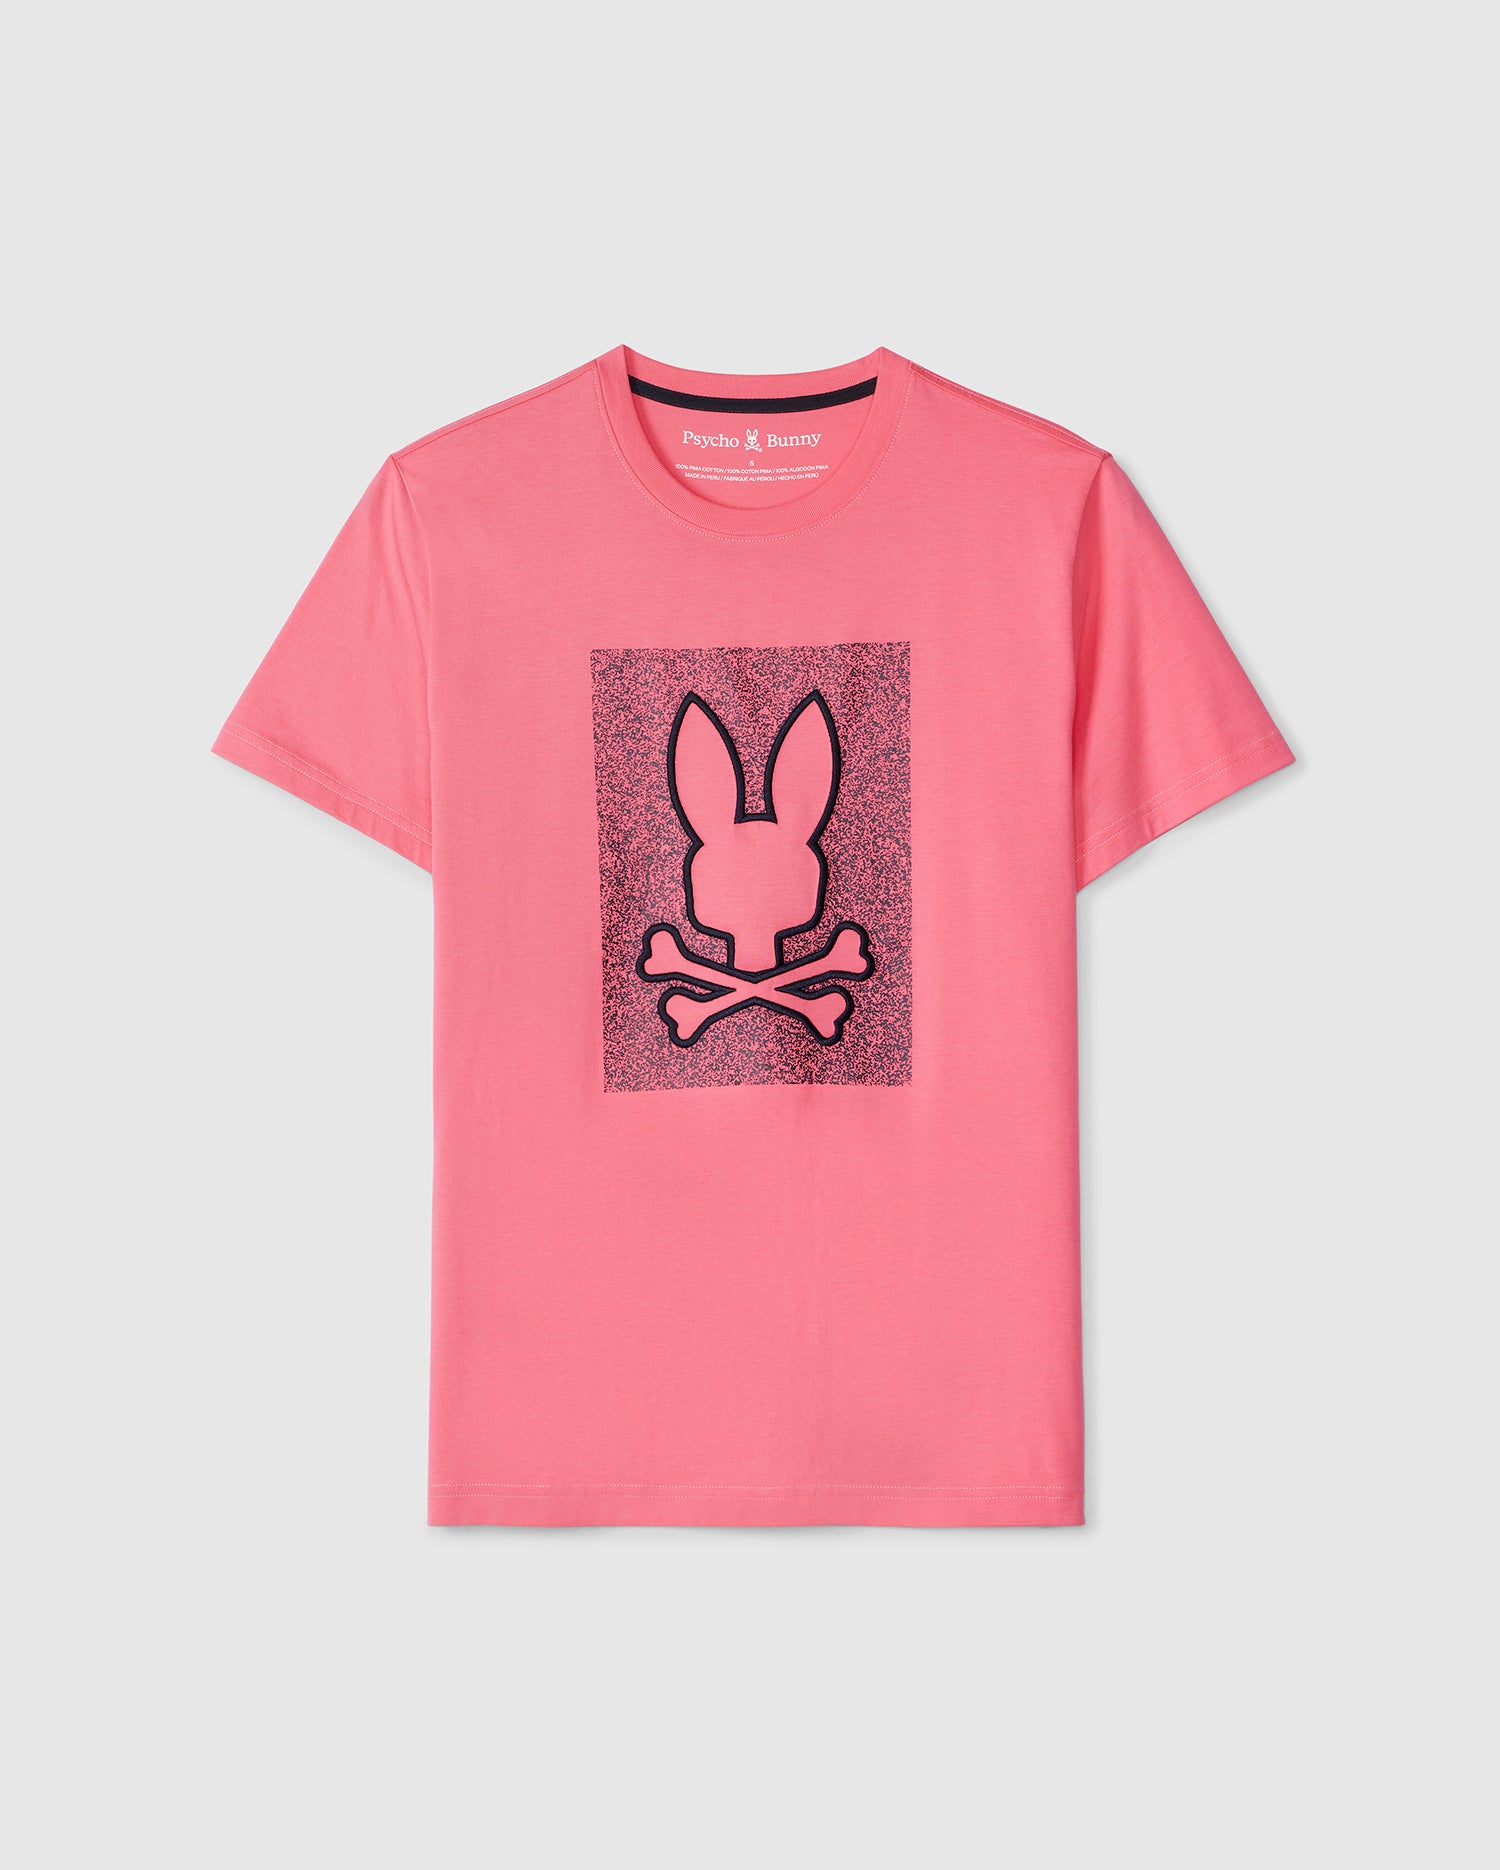 The MENS LIVINGSTON GRAPHIC TEE - B6U247B2TS in pink features a black Bunny design with crossbones underneath. Made from ultra-soft Peruvian Pima cotton, the graphic boasts a textured background, and the renowned 